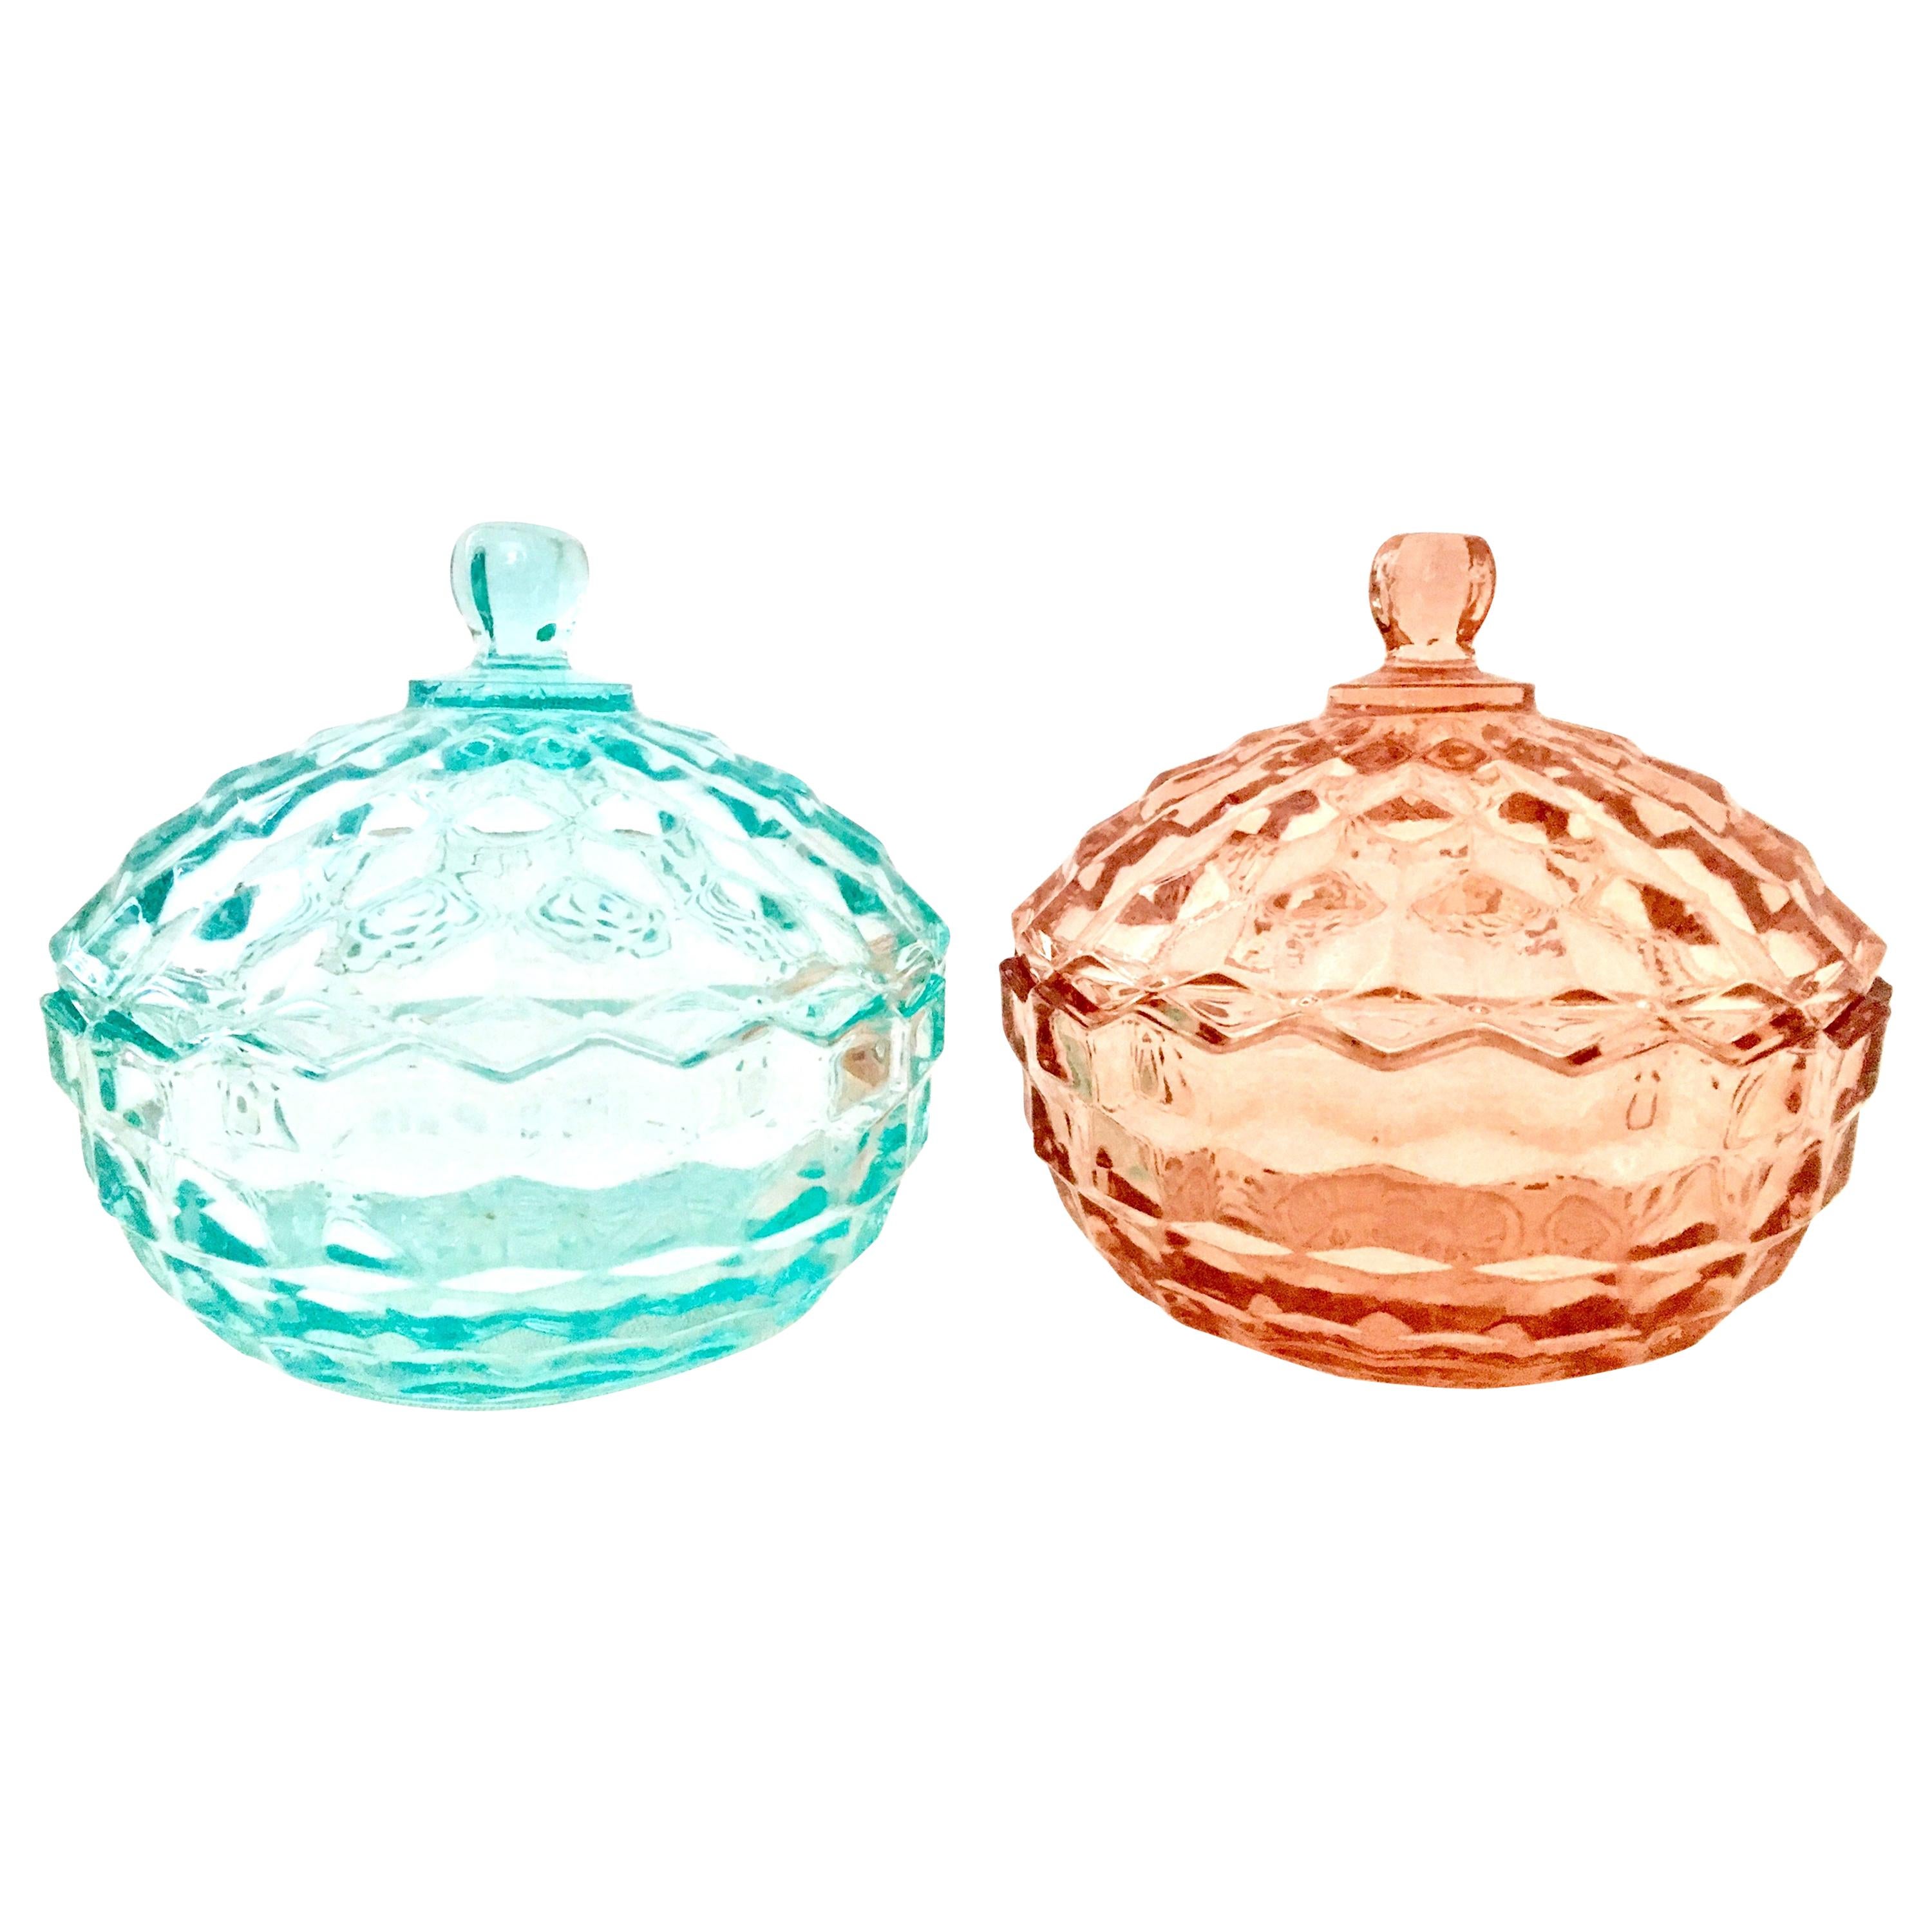 1920s American diamond cut depression era glass lidded jars, set of two. Set includes one teal blue and one pink lidded jar.